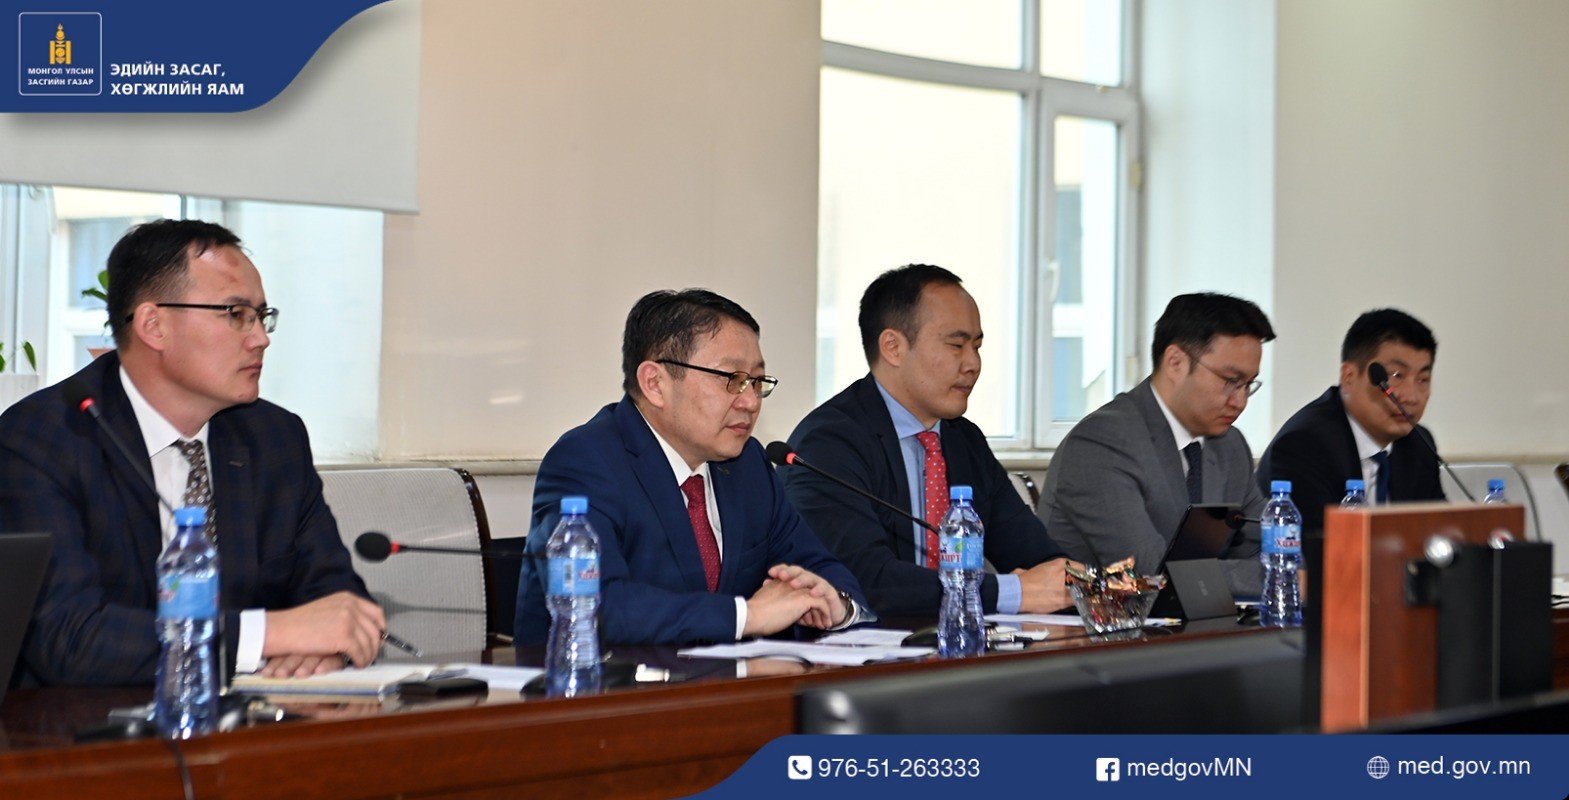 VICE MINISTER OF THE MINISTRY OF ECONOMY AND DEVELOPMENT RECEIVES DELEGATION FROM KYRGYZ REPUBLIC 